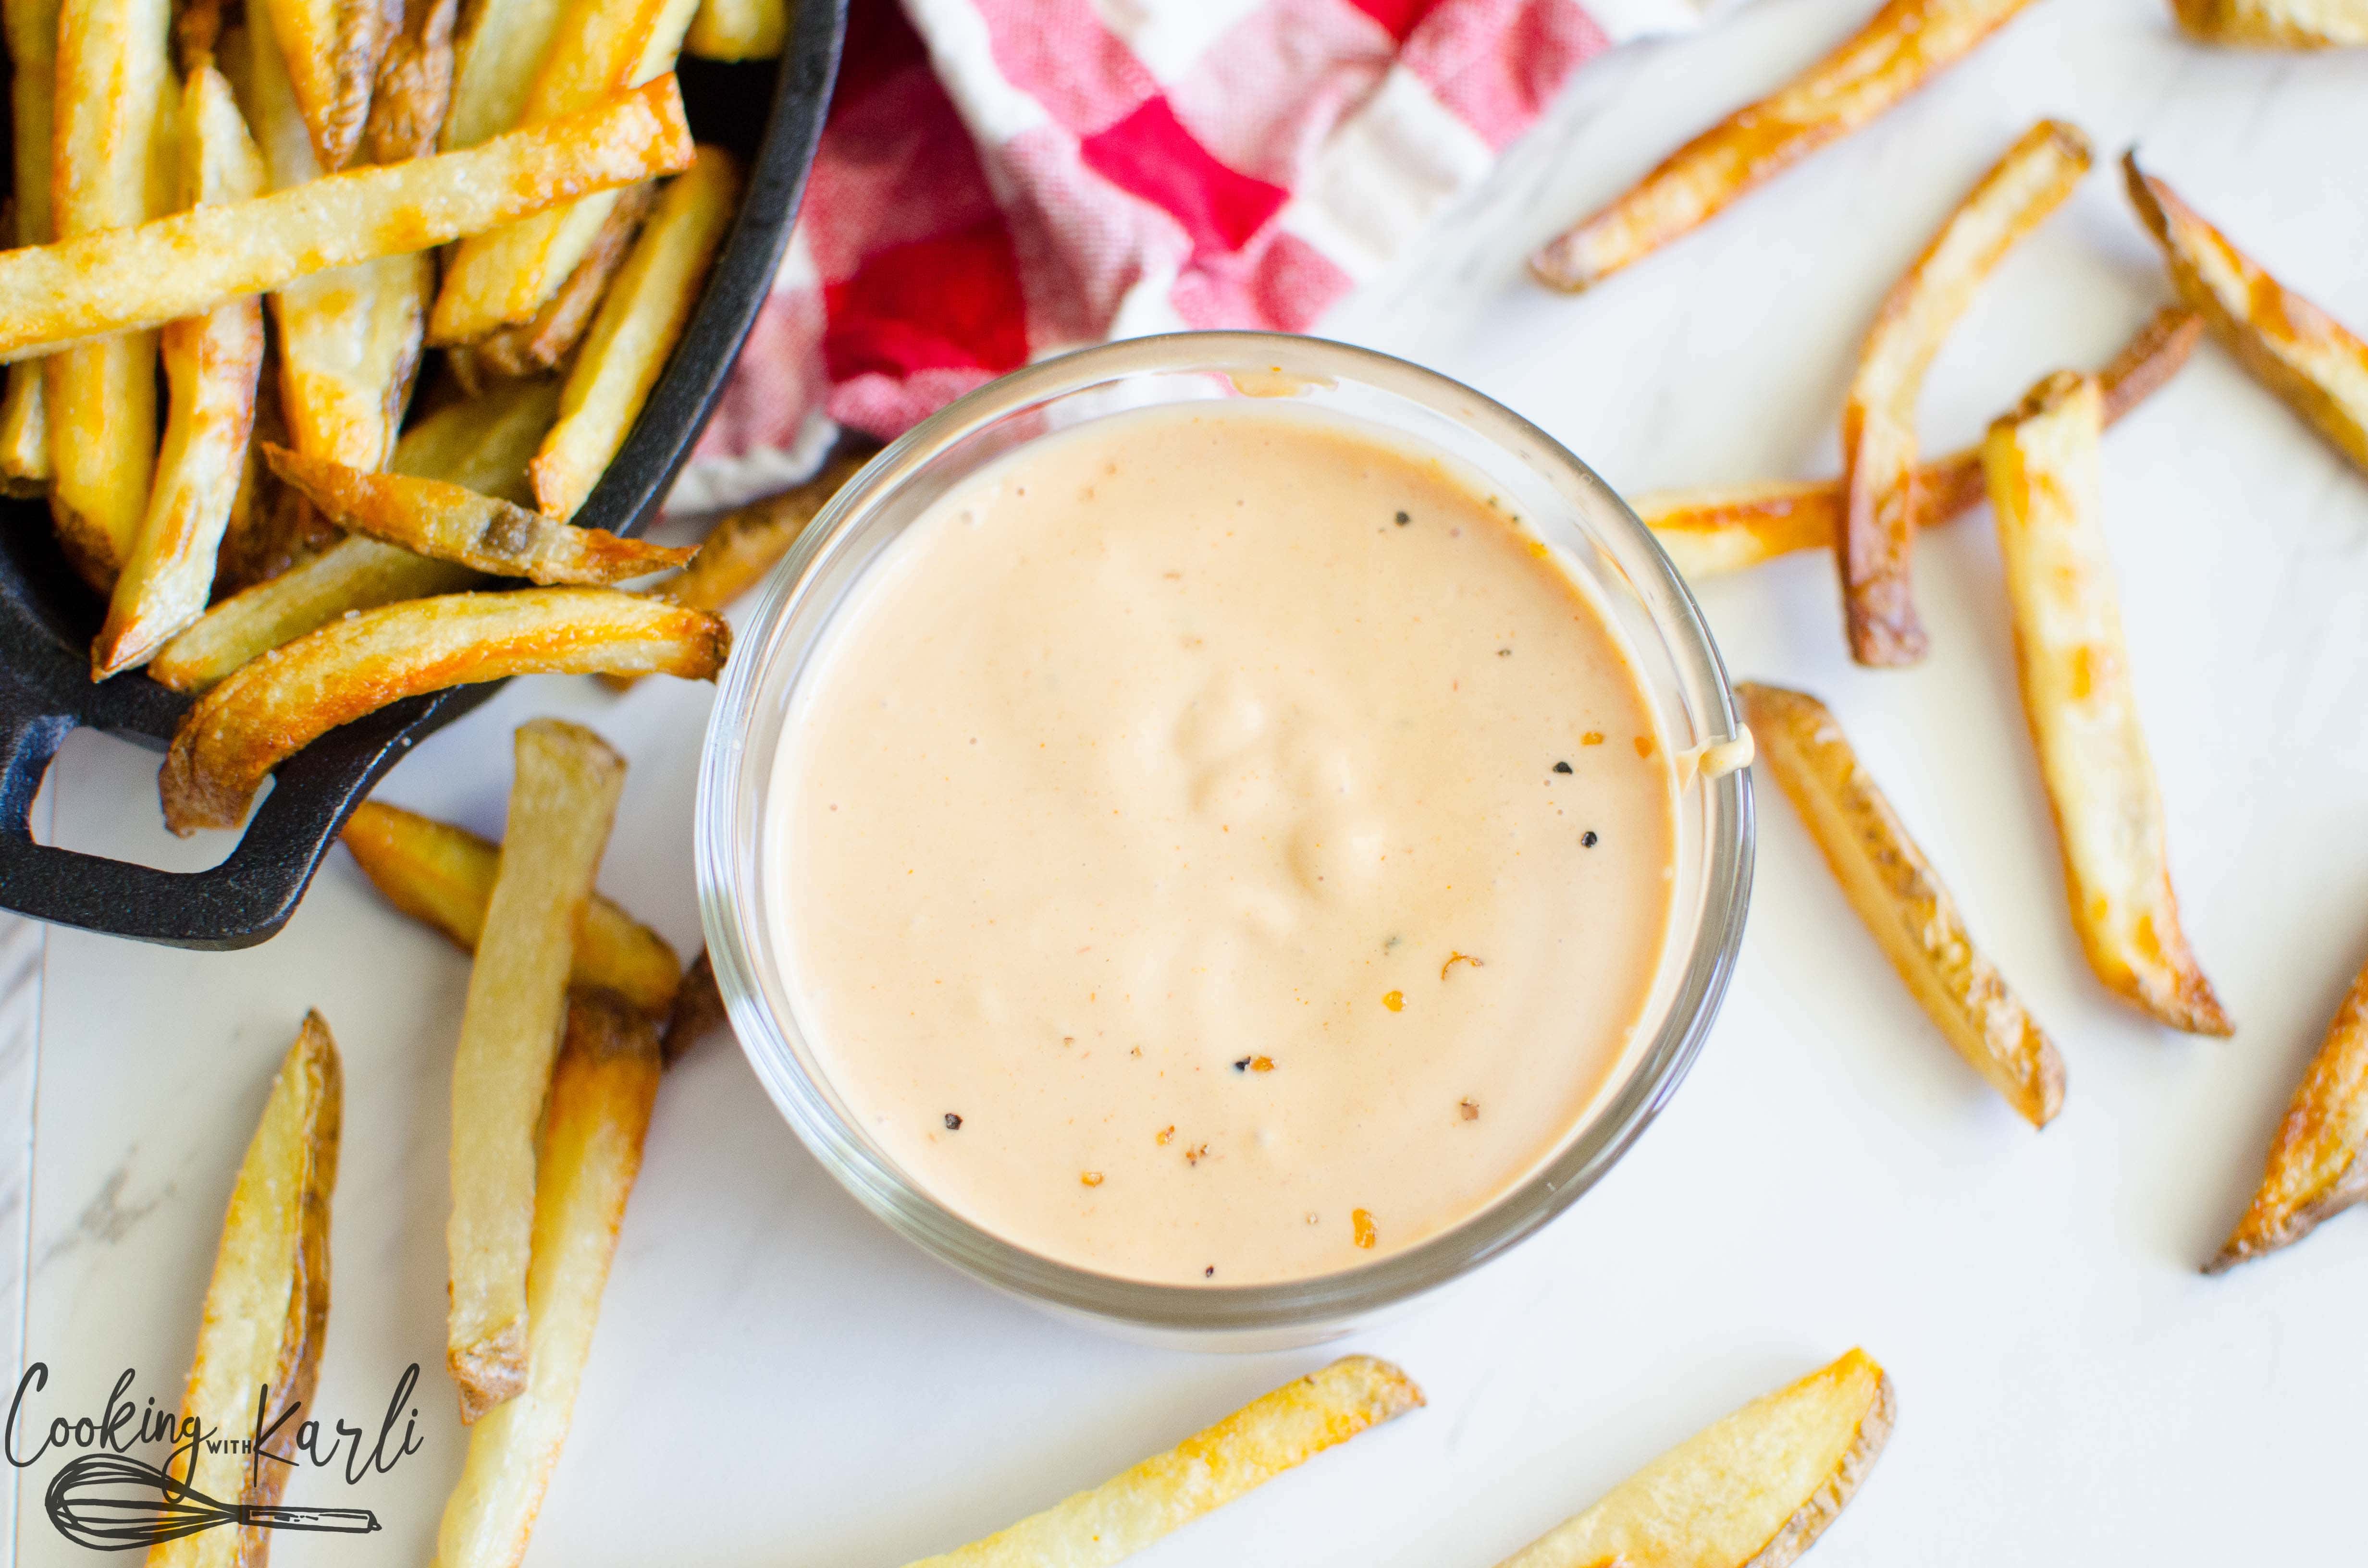 French Fry dipping sauce made from mayo, ketchup, mustard, vinegar and bbq sauce.